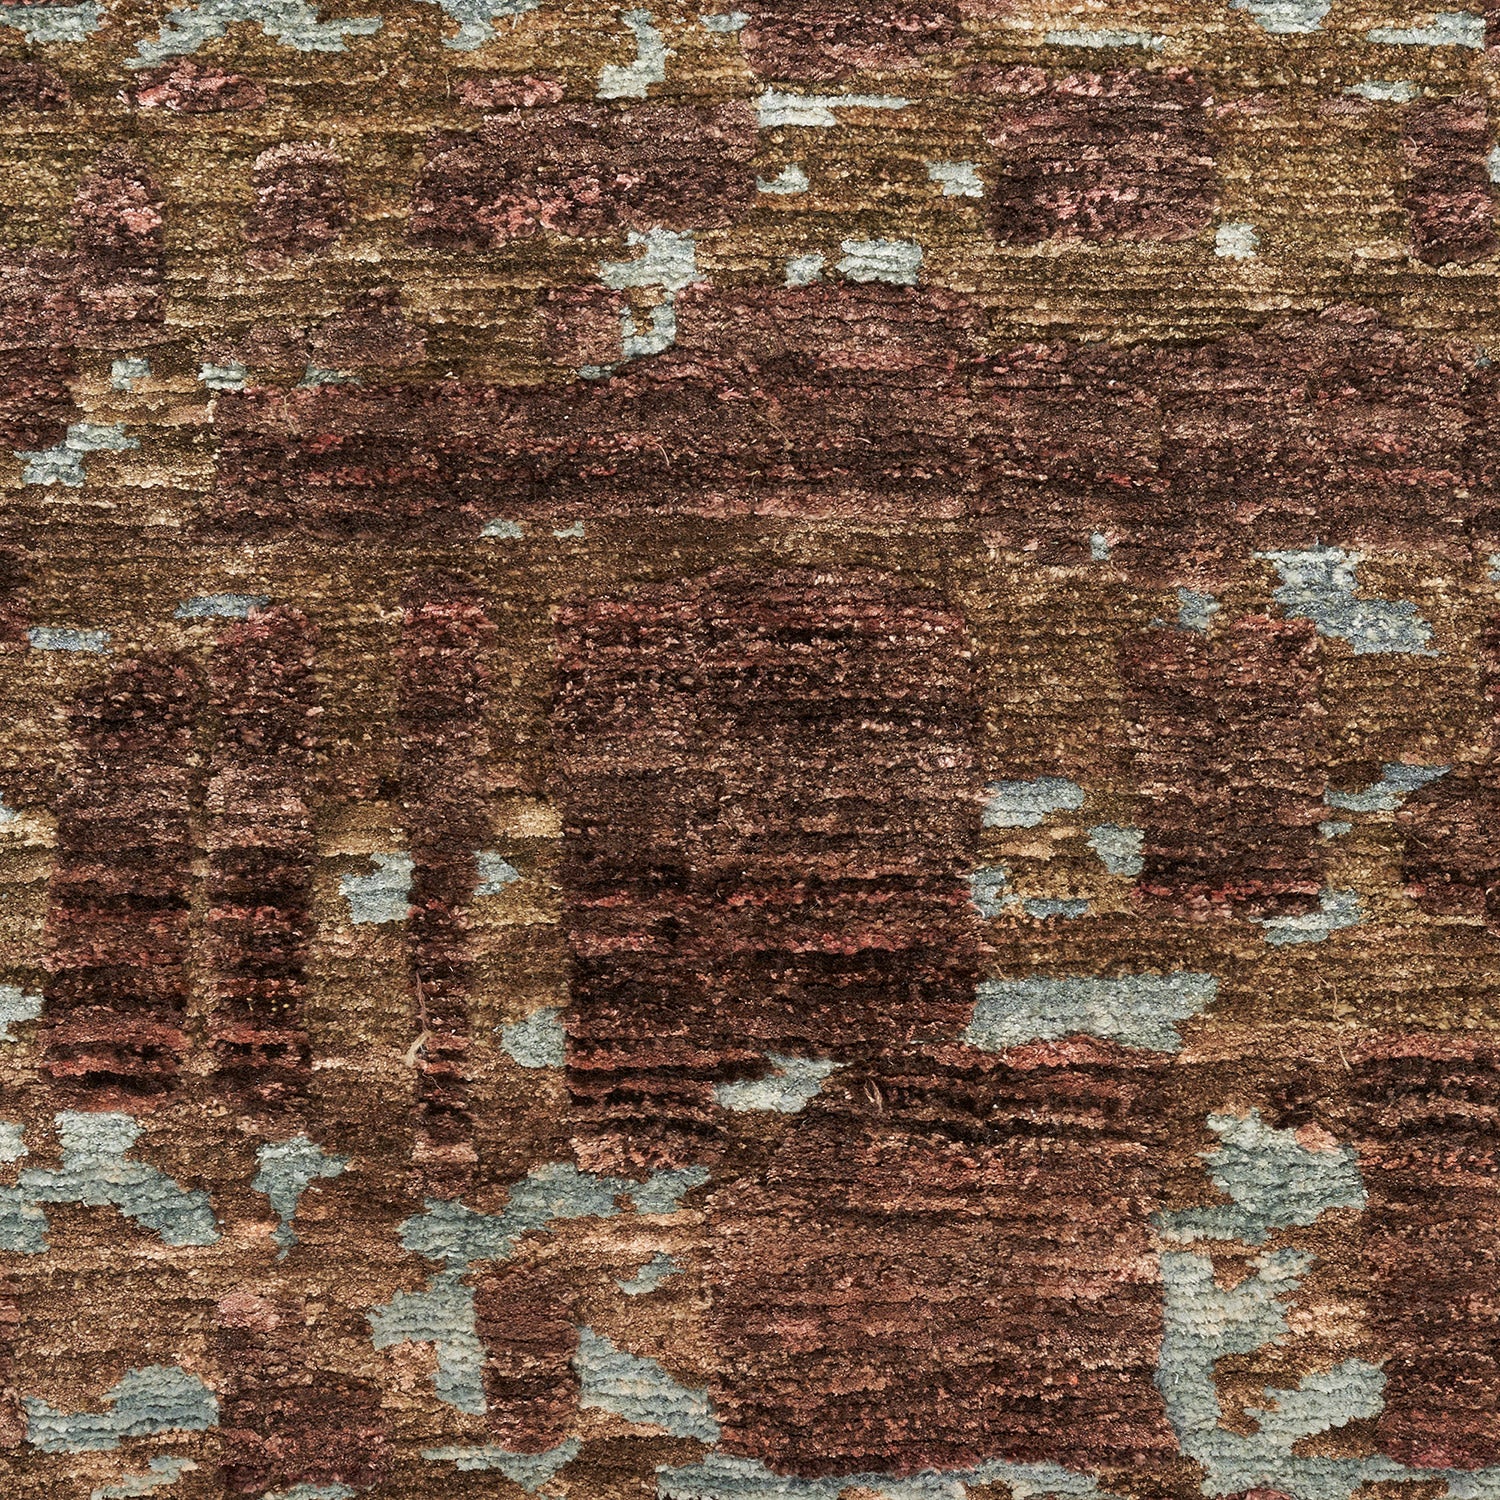 Vintage-inspired textured surface resembling an aged, well-worn textile pattern.